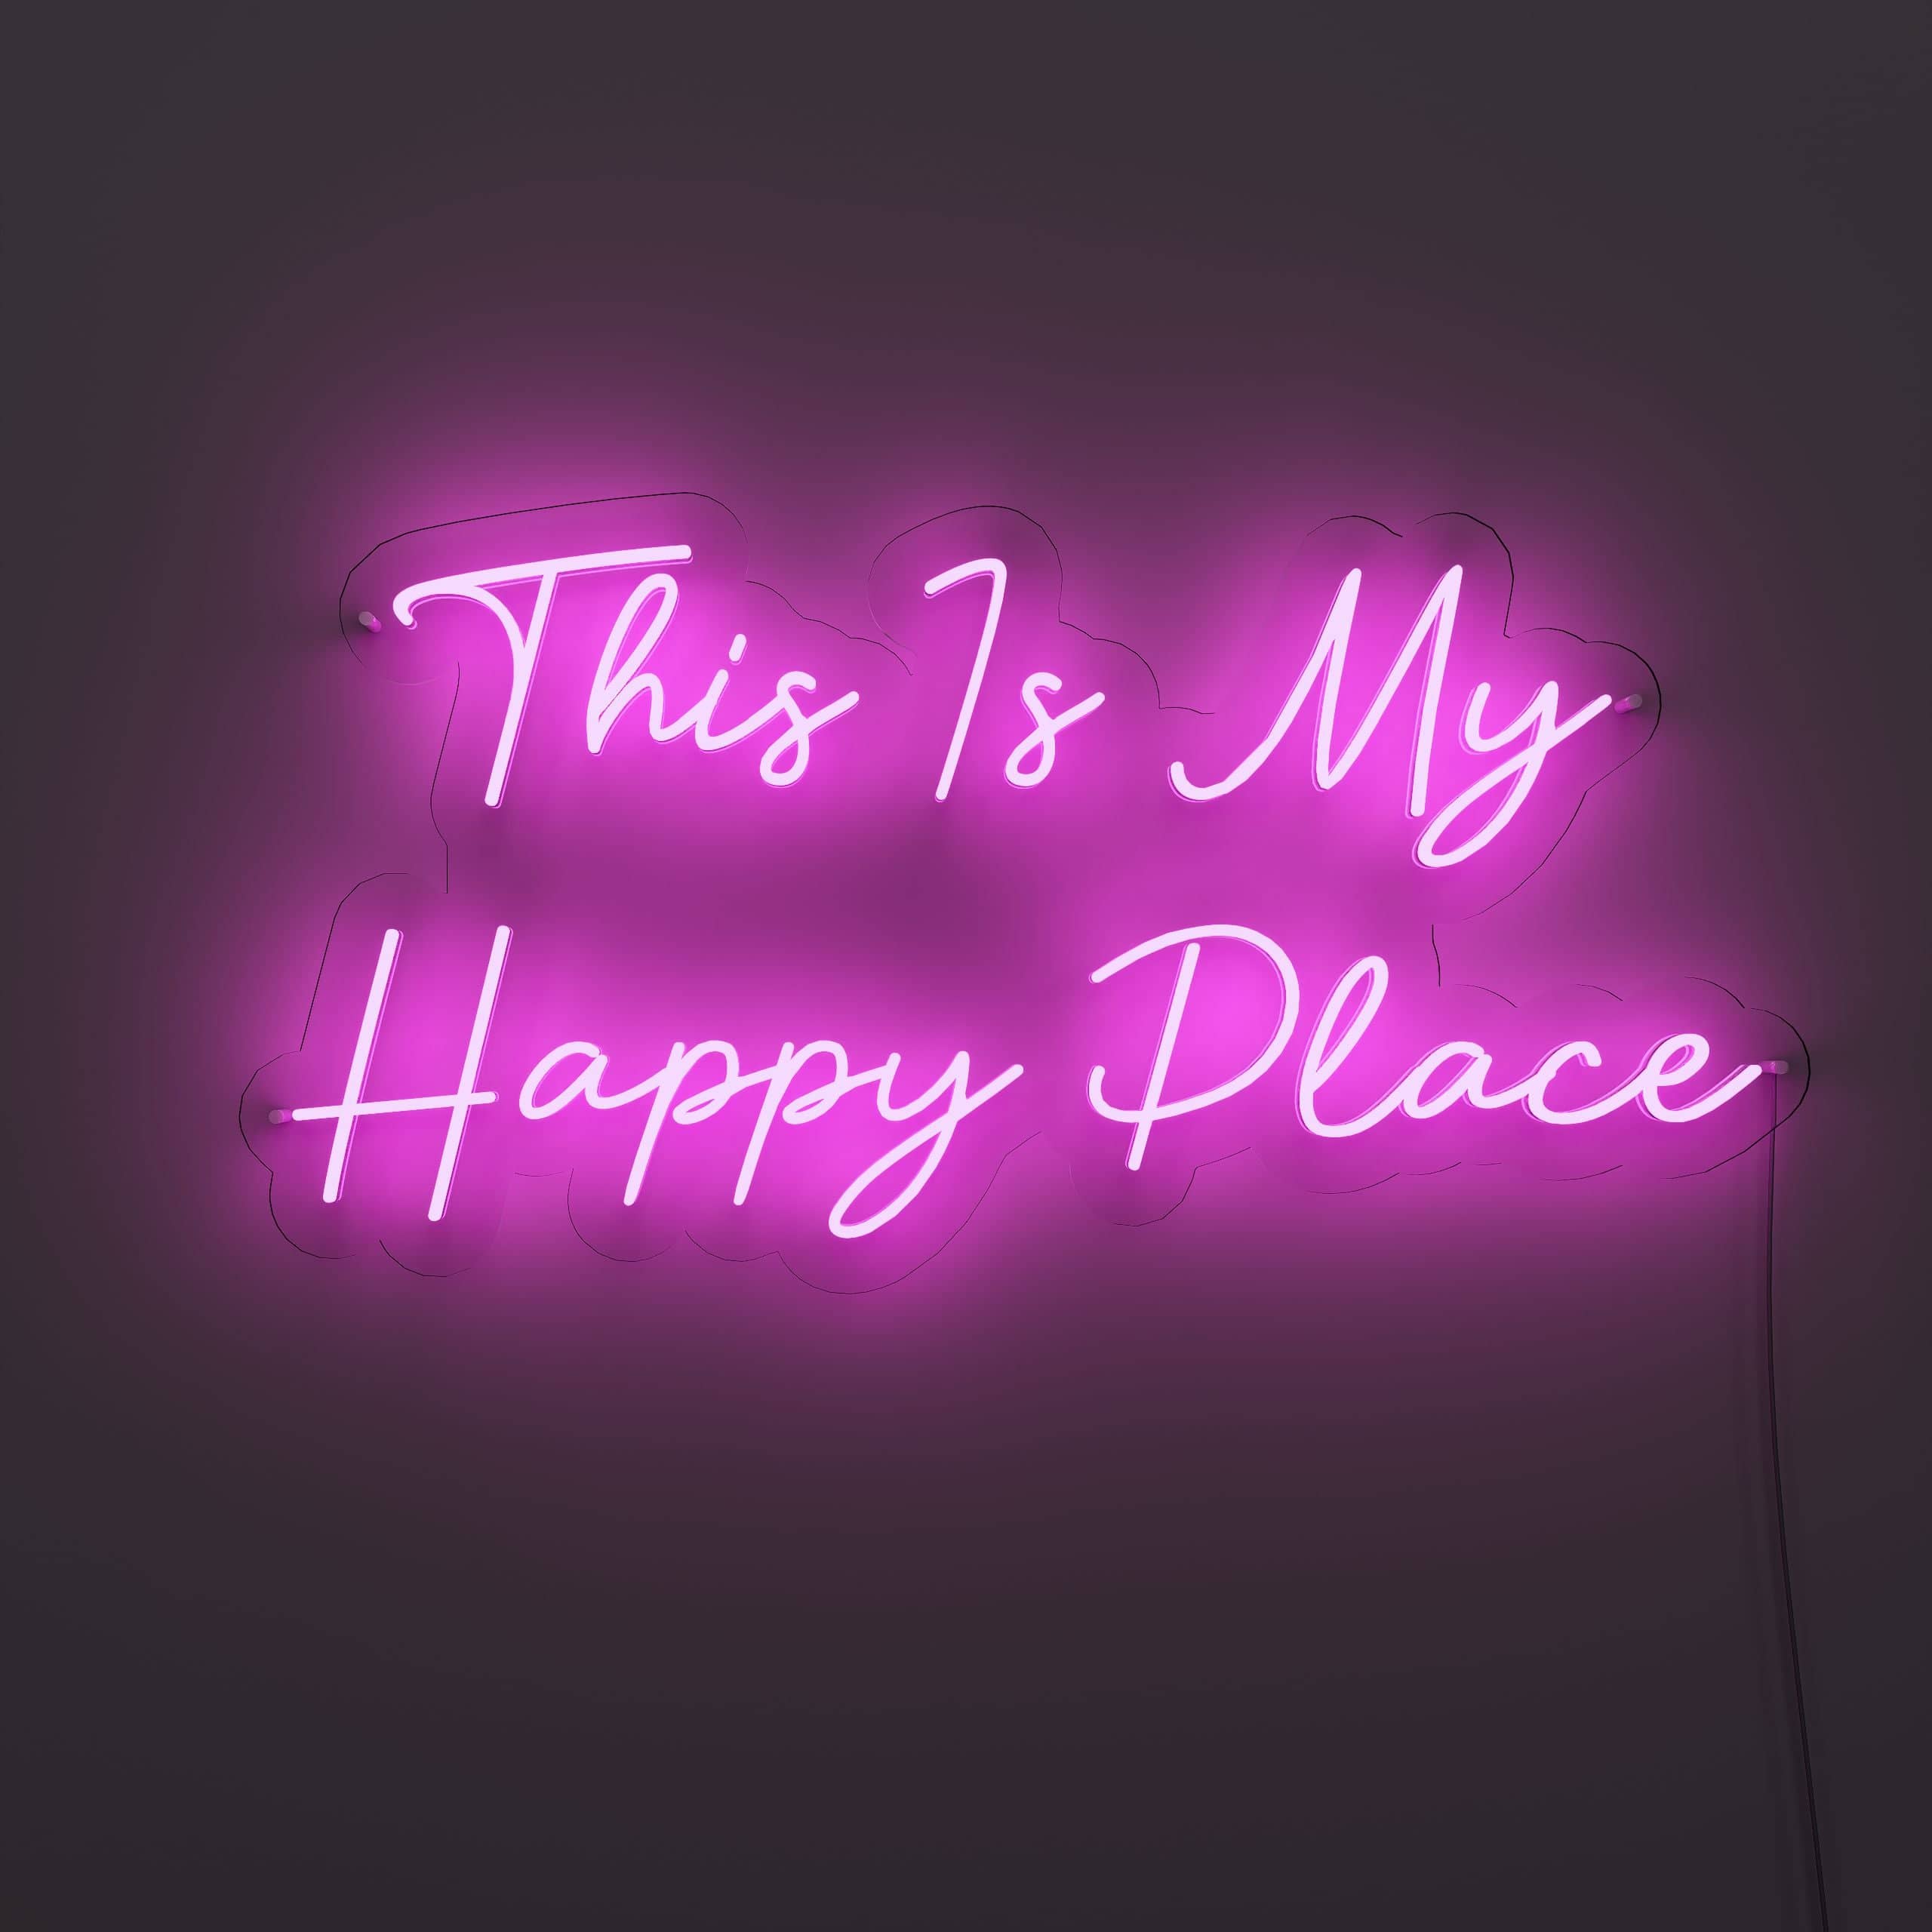 nourish-my-soul-in-this-blissful-spot-neon-sign-lite